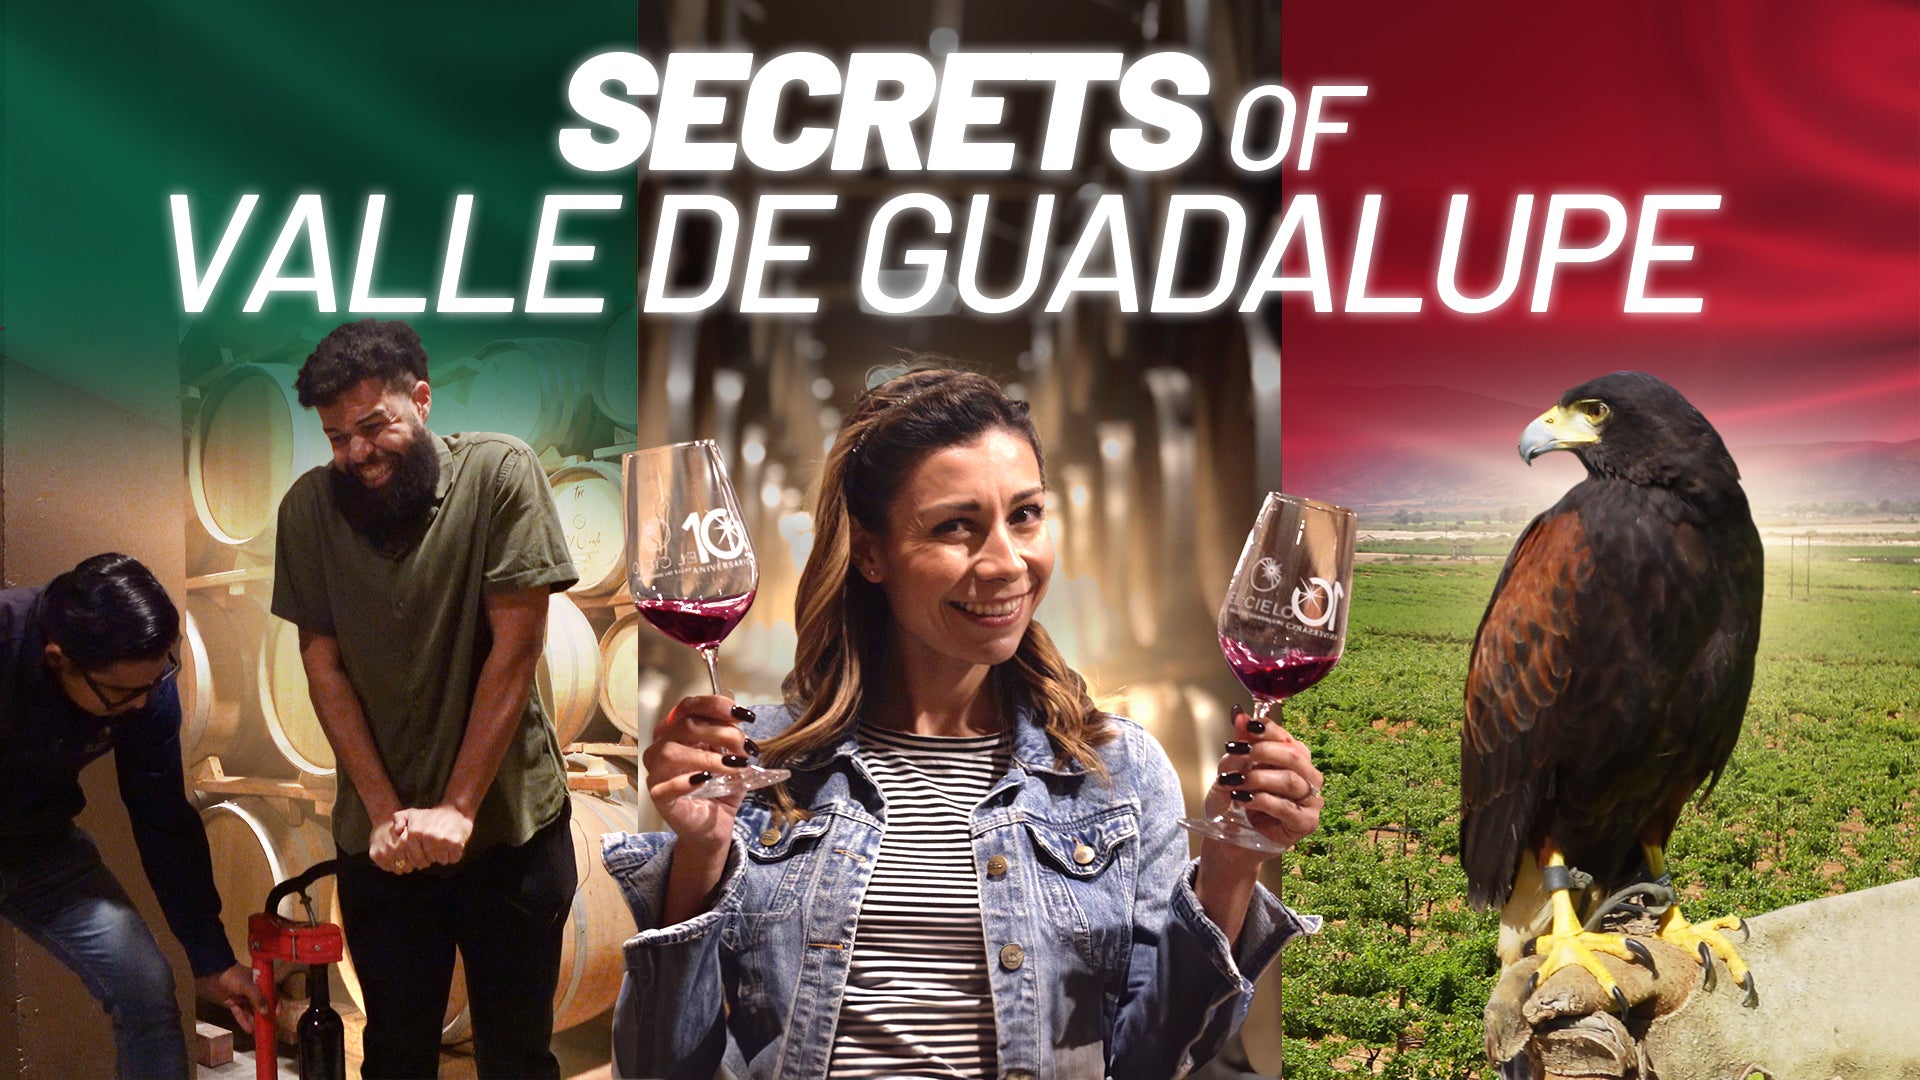 Video: Inside Mexico's hidden wine country, Valle de Guadalupe